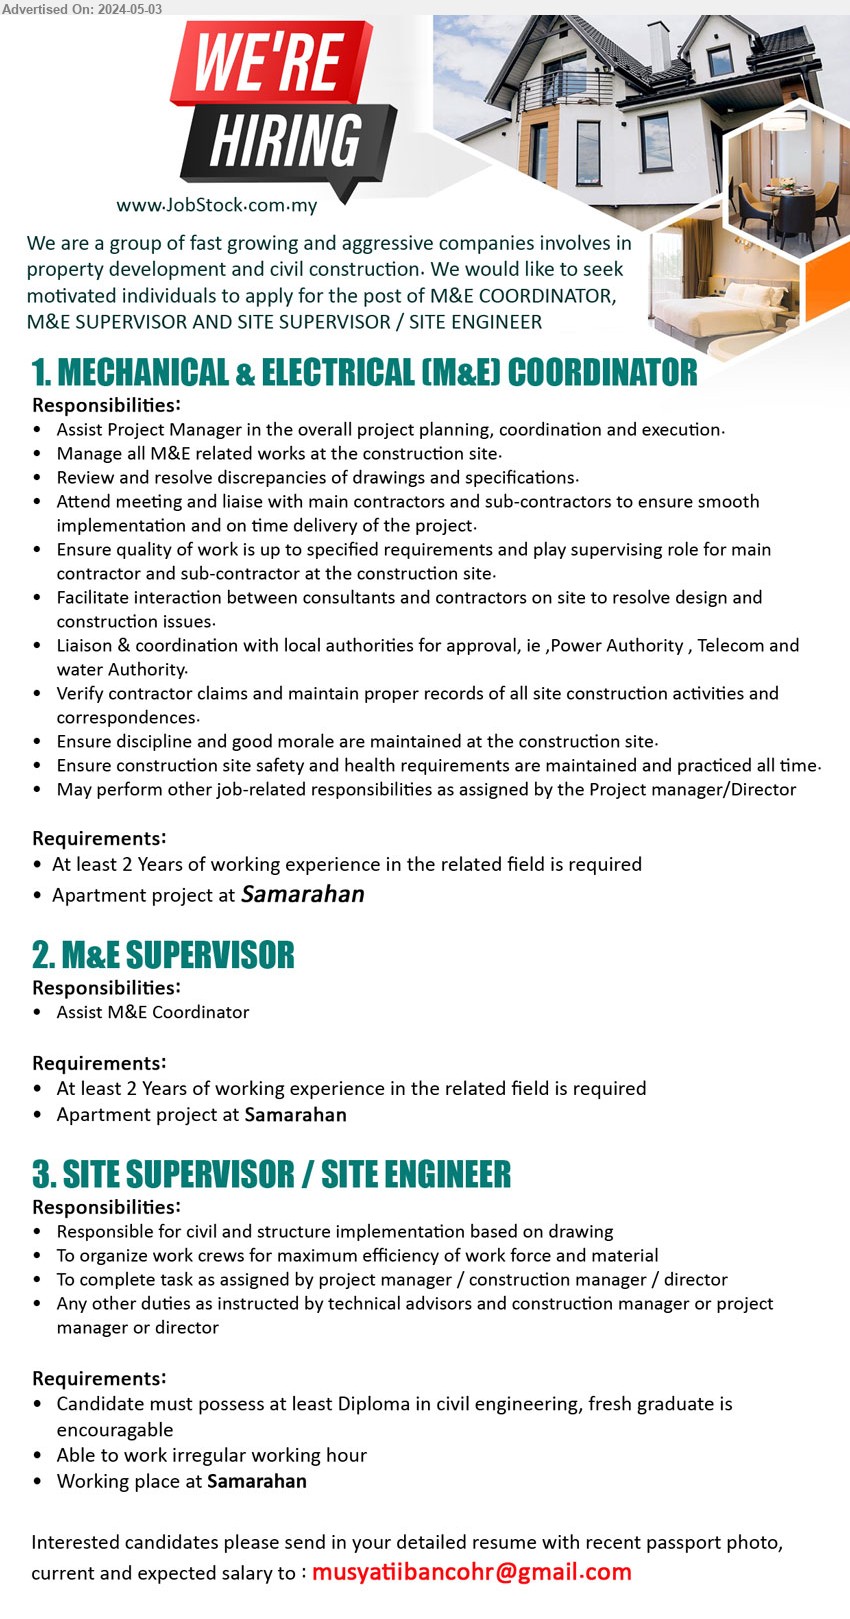 ADVERTISER - 1. MECHANICAL & ELECTRICAL (M&E) COORDINATOR  (Samarahan), 2 yrs. exp., Assist Project Manager in the overall project planning, coordination and execution,...
2. M&E SUPERVISOR (Samarahan), 2 yrs. exp., Assist M&E Coordinator,...
3. SITE SUPERVISOR / SITE ENGINEER (Samarahan), Diploma in civil engineering, fresh graduate is encouragable,...
Email resume to ...